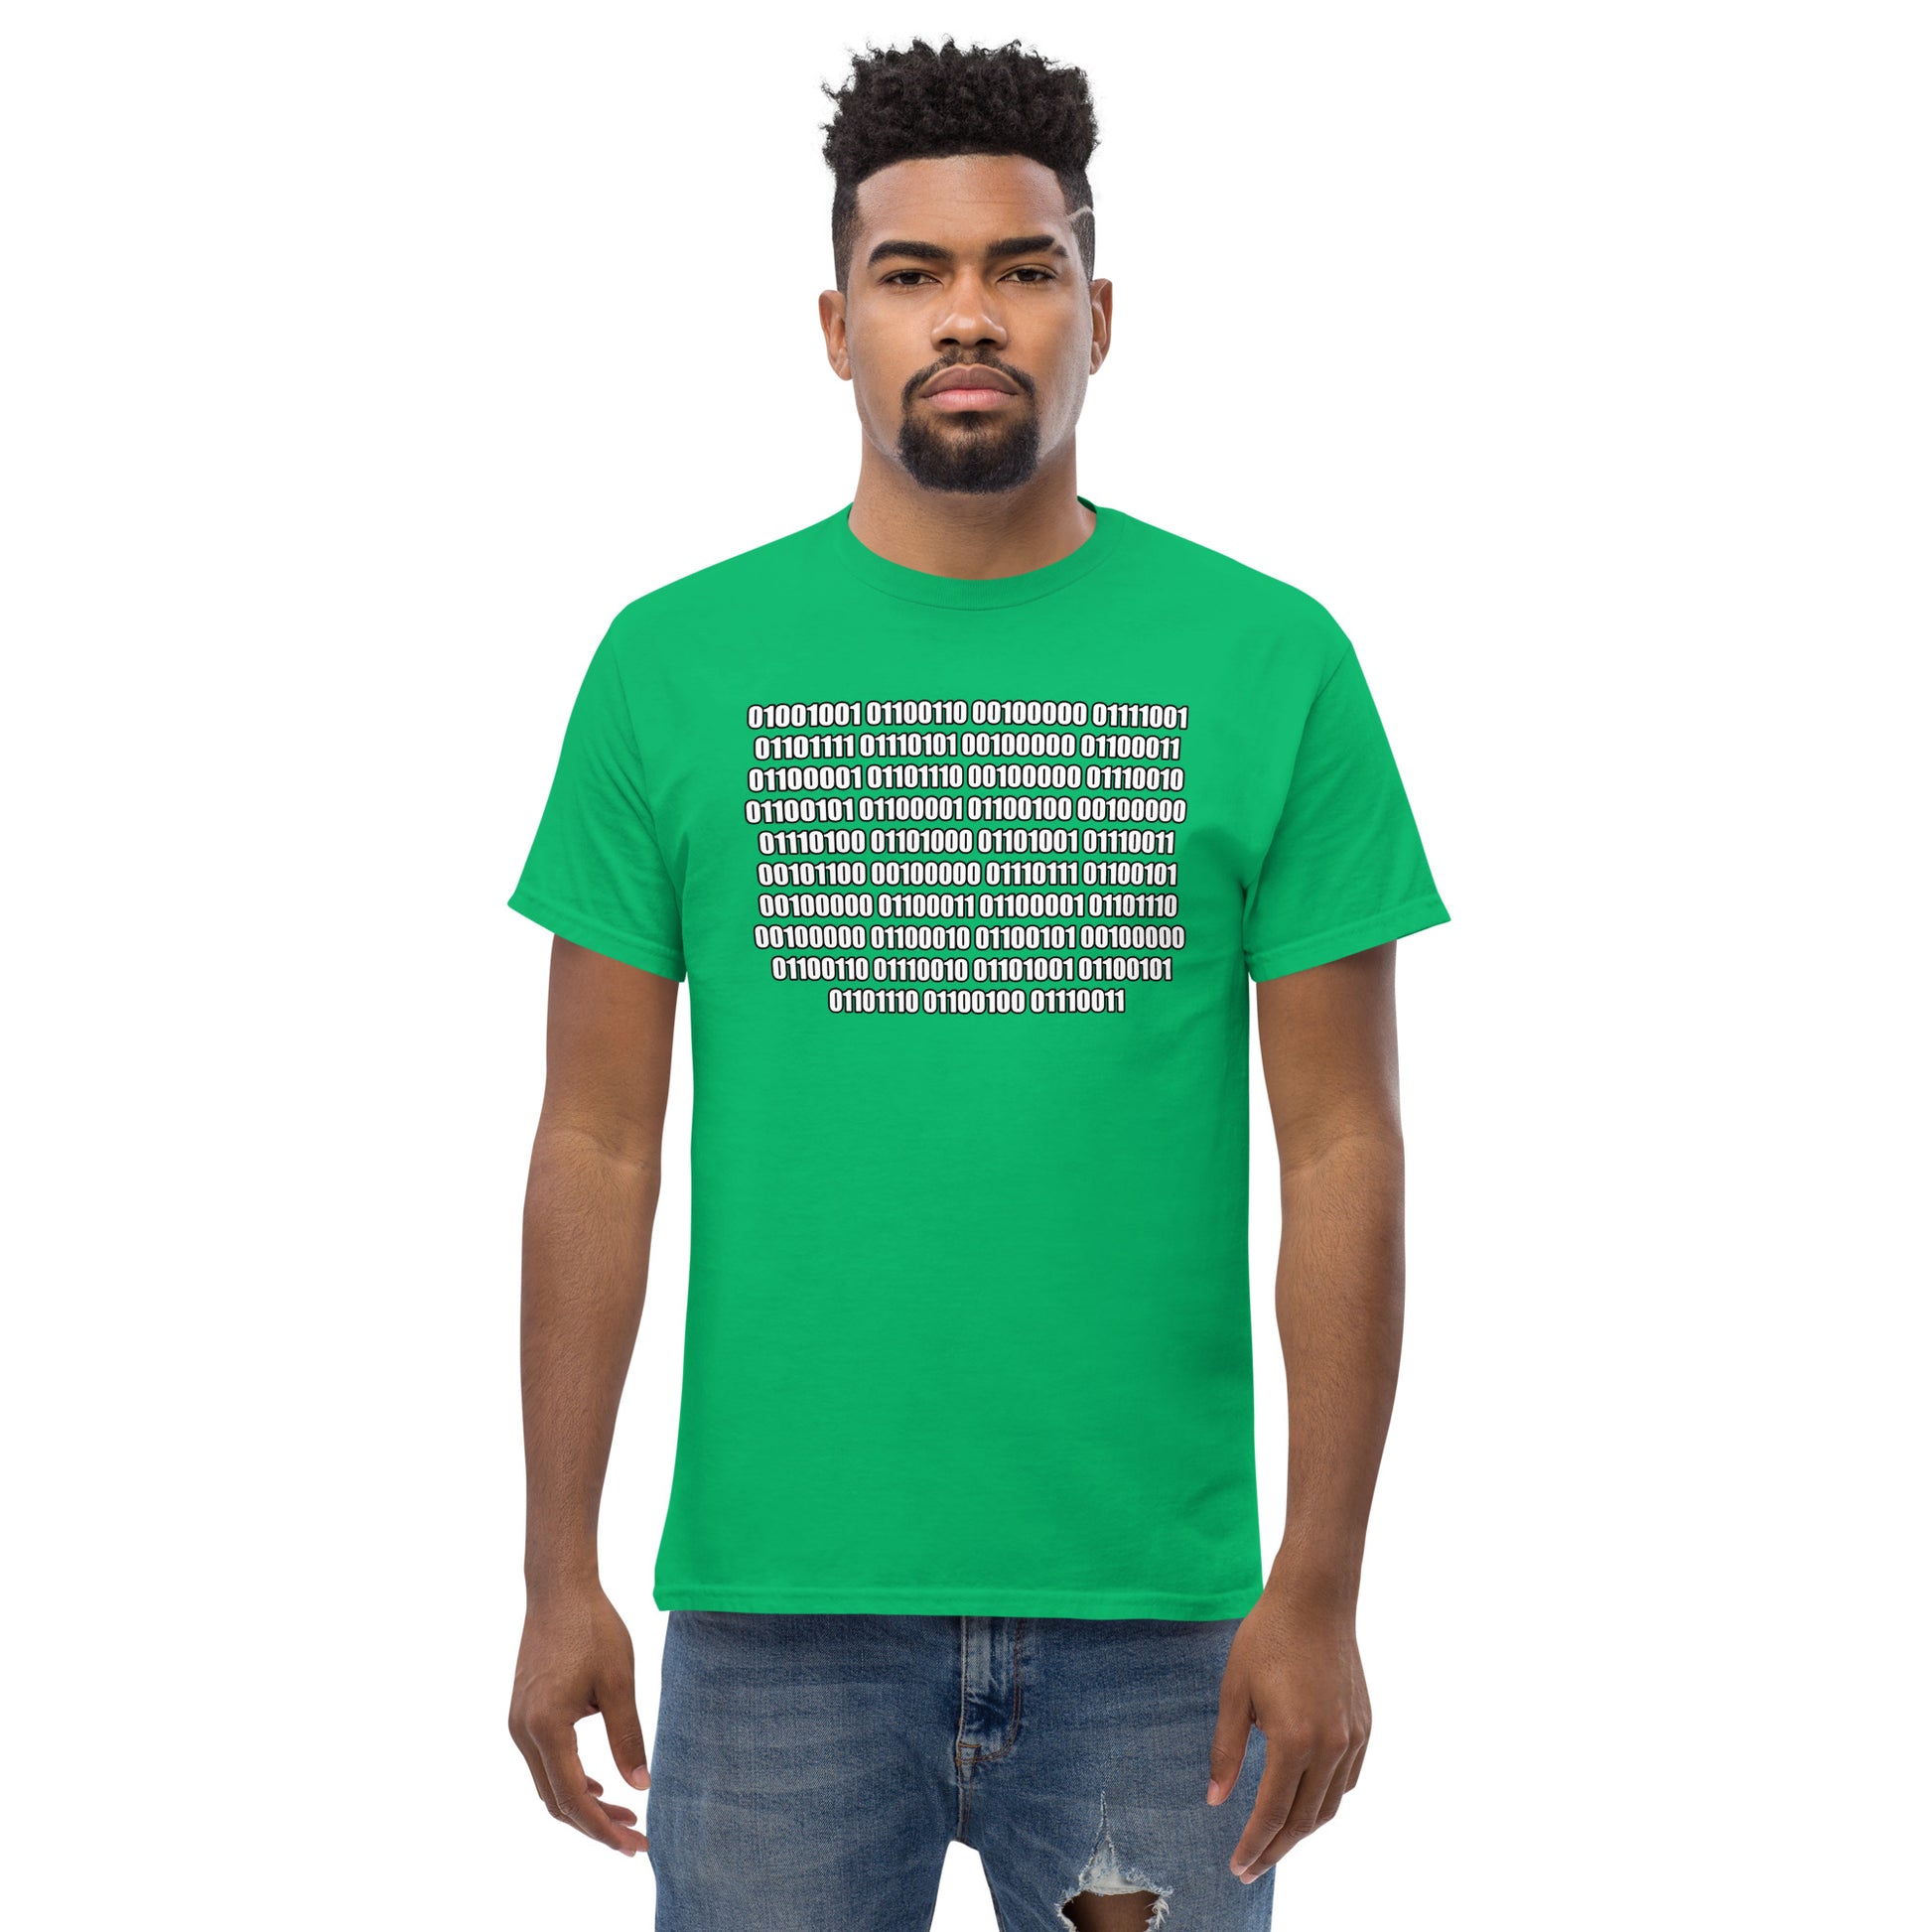 Men with irish green t-shirt with binaire text "If you can read this"